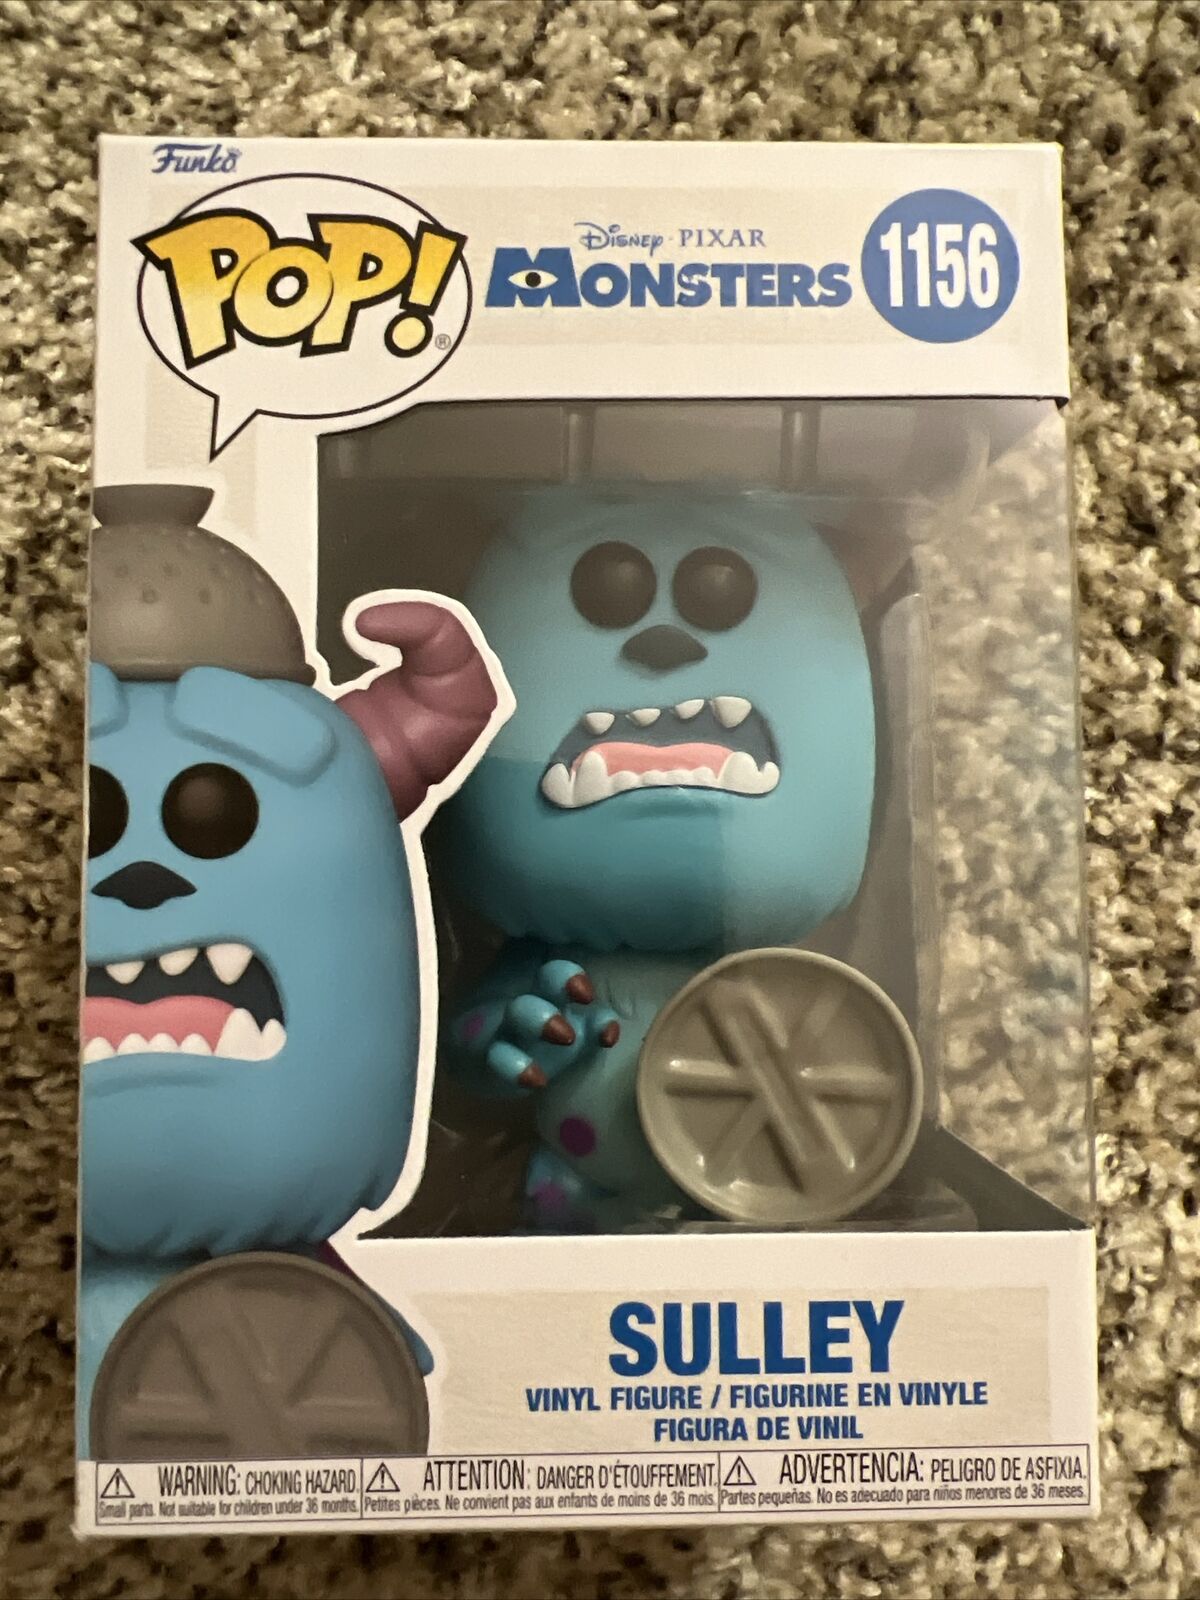 Funko Pop Disney Pixar Monsters Inc. Sully & DAILY SHIPPING